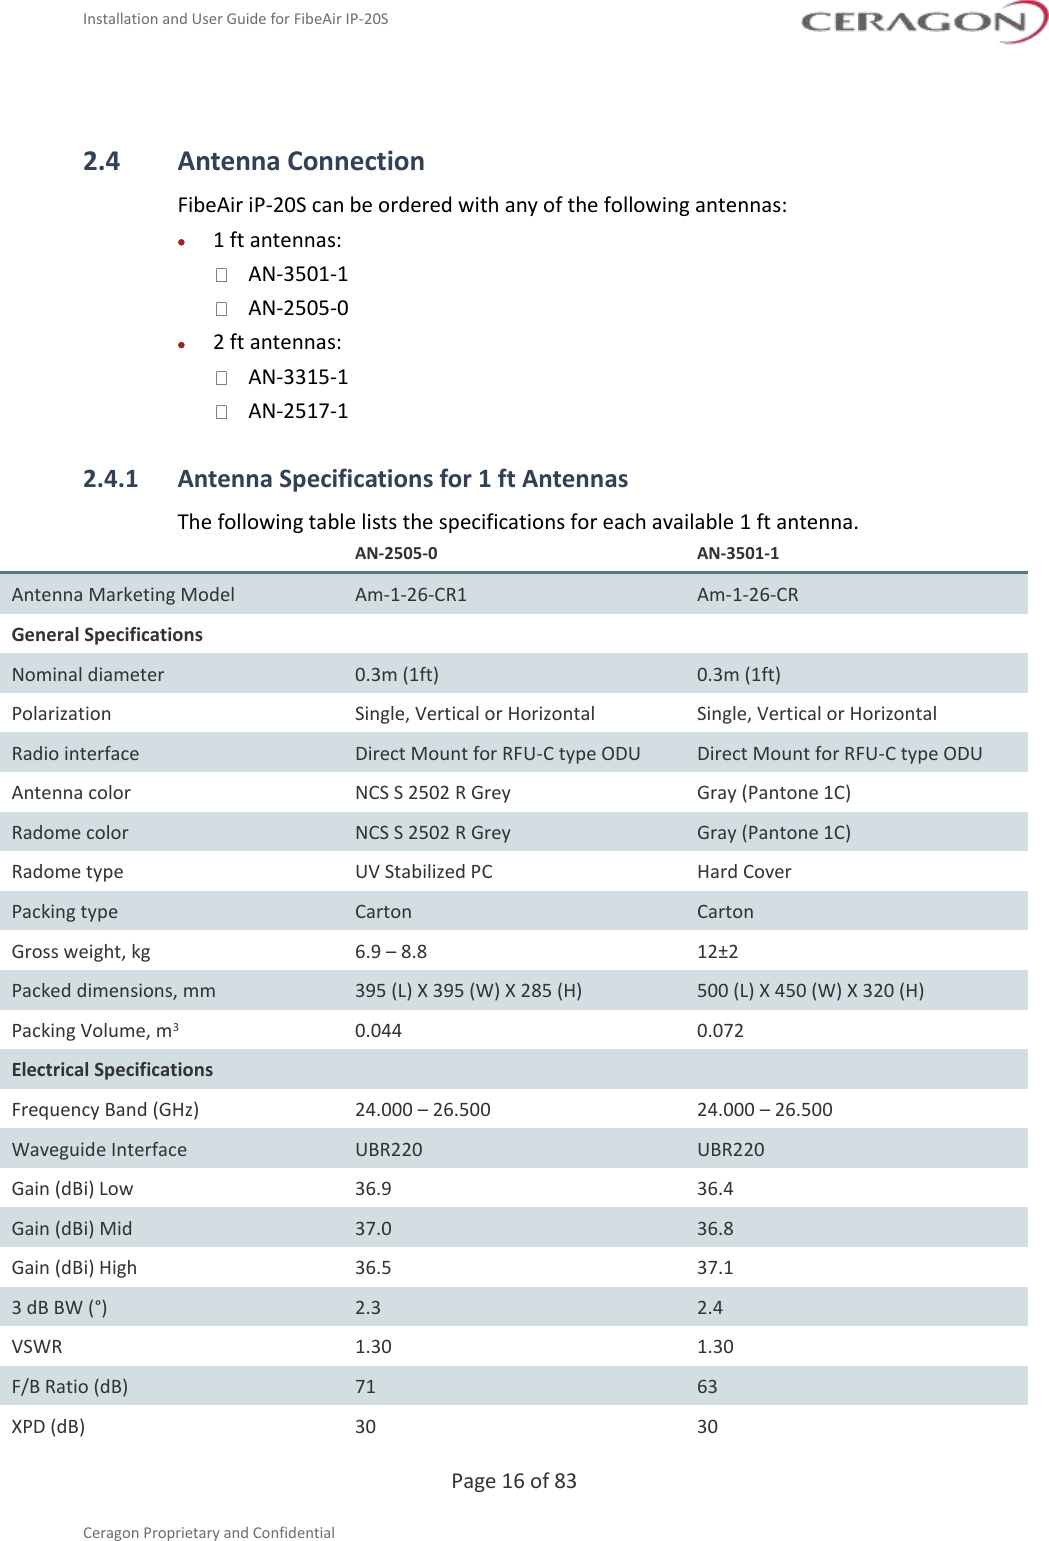 Installation and User Guide for FibeAir IP-20S  Page 16 of 83  Ceragon Proprietary and Confidential  2.4 Antenna Connection FibeAir iP-20S can be ordered with any of the following antennas: • 1 ft antennas:  AN-3501-1  AN-2505-0 • 2 ft antennas:  AN-3315-1  AN-2517-1 2.4.1 Antenna Specifications for 1 ft Antennas The following table lists the specifications for each available 1 ft antenna.  AN-2505-0 AN-3501-1 Antenna Marketing Model Am-1-26-CR1 Am-1-26-CR General Specifications Nominal diameter 0.3m (1ft) 0.3m (1ft) Polarization Single, Vertical or Horizontal Single, Vertical or Horizontal Radio interface Direct Mount for RFU-C type ODU Direct Mount for RFU-C type ODU Antenna color NCS S 2502 R Grey Gray (Pantone 1C) Radome color NCS S 2502 R Grey Gray (Pantone 1C) Radome type UV Stabilized PC Hard Cover Packing type Carton Carton Gross weight, kg 6.9 – 8.8 12±2 Packed dimensions, mm 395 (L) X 395 (W) X 285 (H) 500 (L) X 450 (W) X 320 (H) Packing Volume, m3 0.044 0.072 Electrical Specifications Frequency Band (GHz) 24.000 – 26.500 24.000 – 26.500 Waveguide Interface UBR220 UBR220 Gain (dBi) Low 36.9 36.4 Gain (dBi) Mid 37.0 36.8 Gain (dBi) High 36.5 37.1 3 dB BW (°) 2.3 2.4 VSWR 1.30 1.30 F/B Ratio (dB) 71 63 XPD (dB) 30 30 